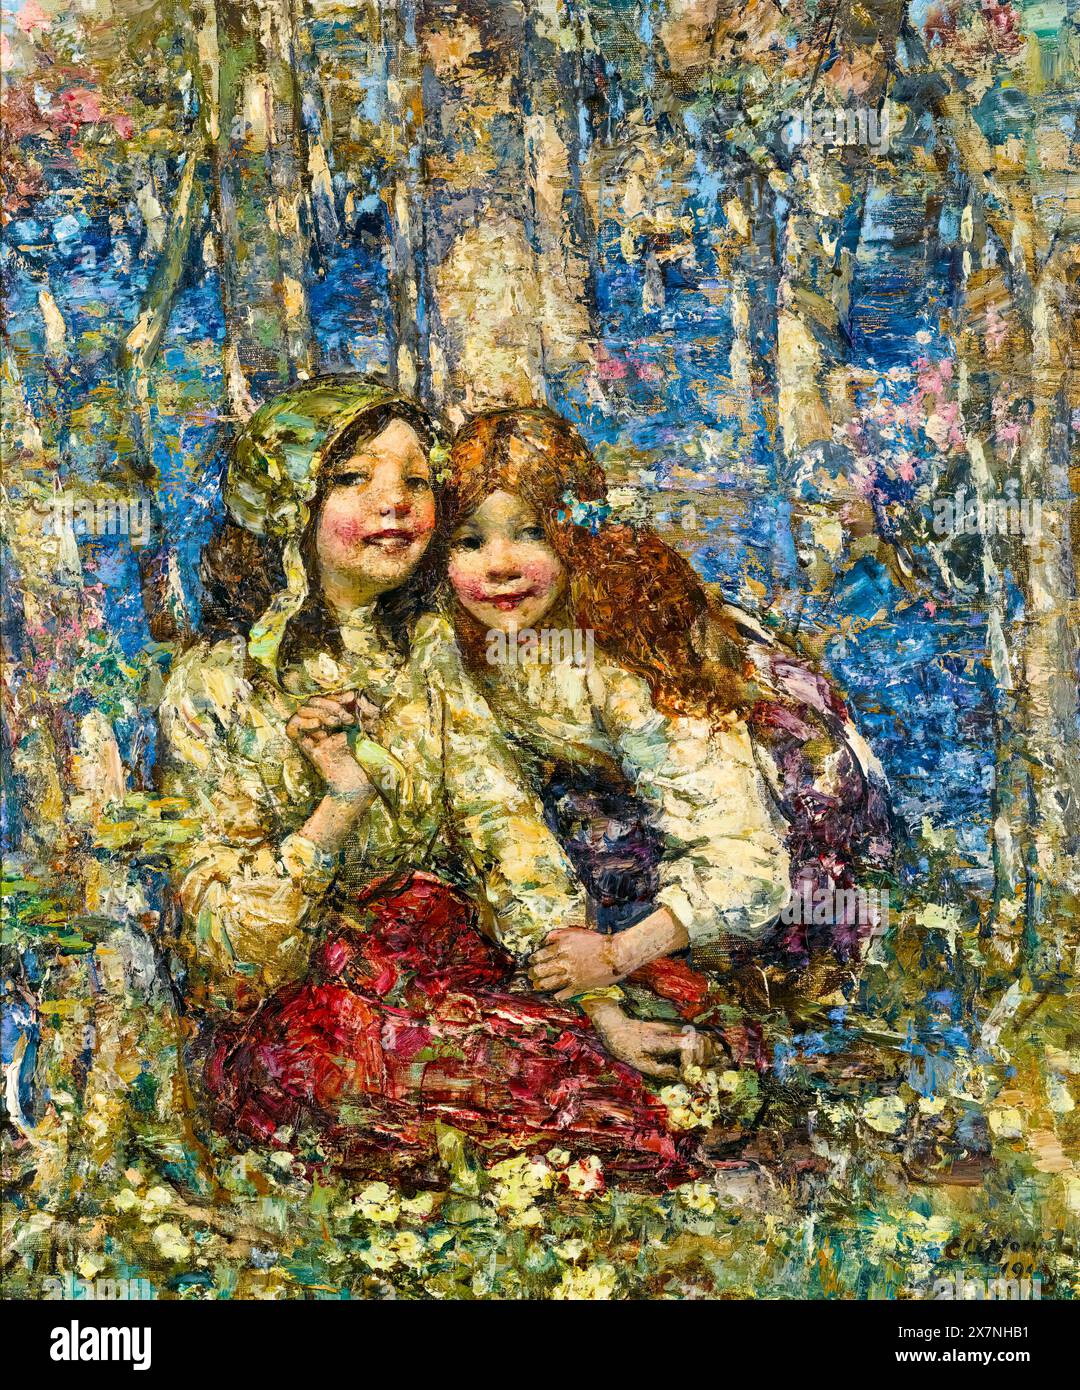 Edward Atkinson Hornel painting, The Bluebell Wood, oil on canvas, 1919 Stock Photo